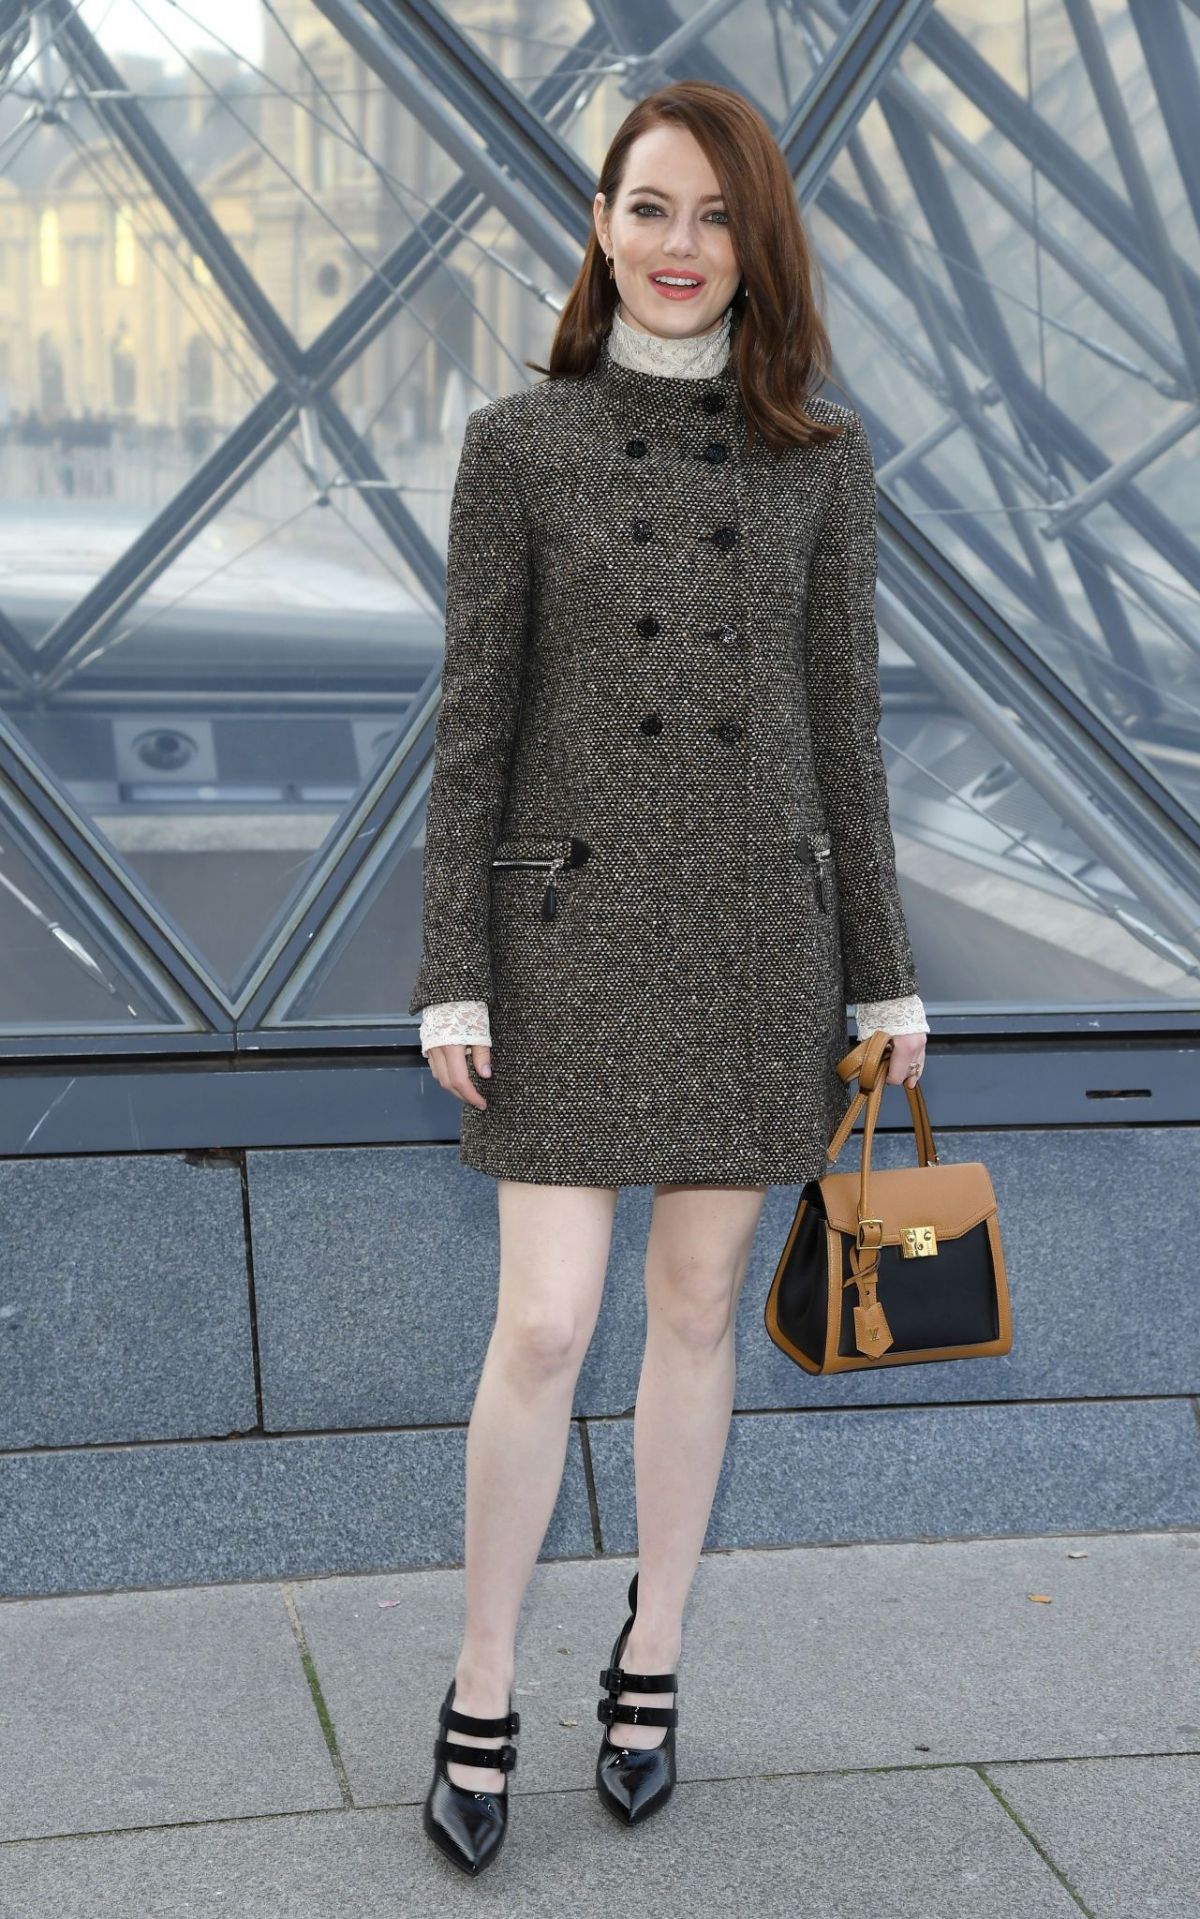 Emma Stone Keeps it Formal But Glamorous in Her Grey Louis Vuitton